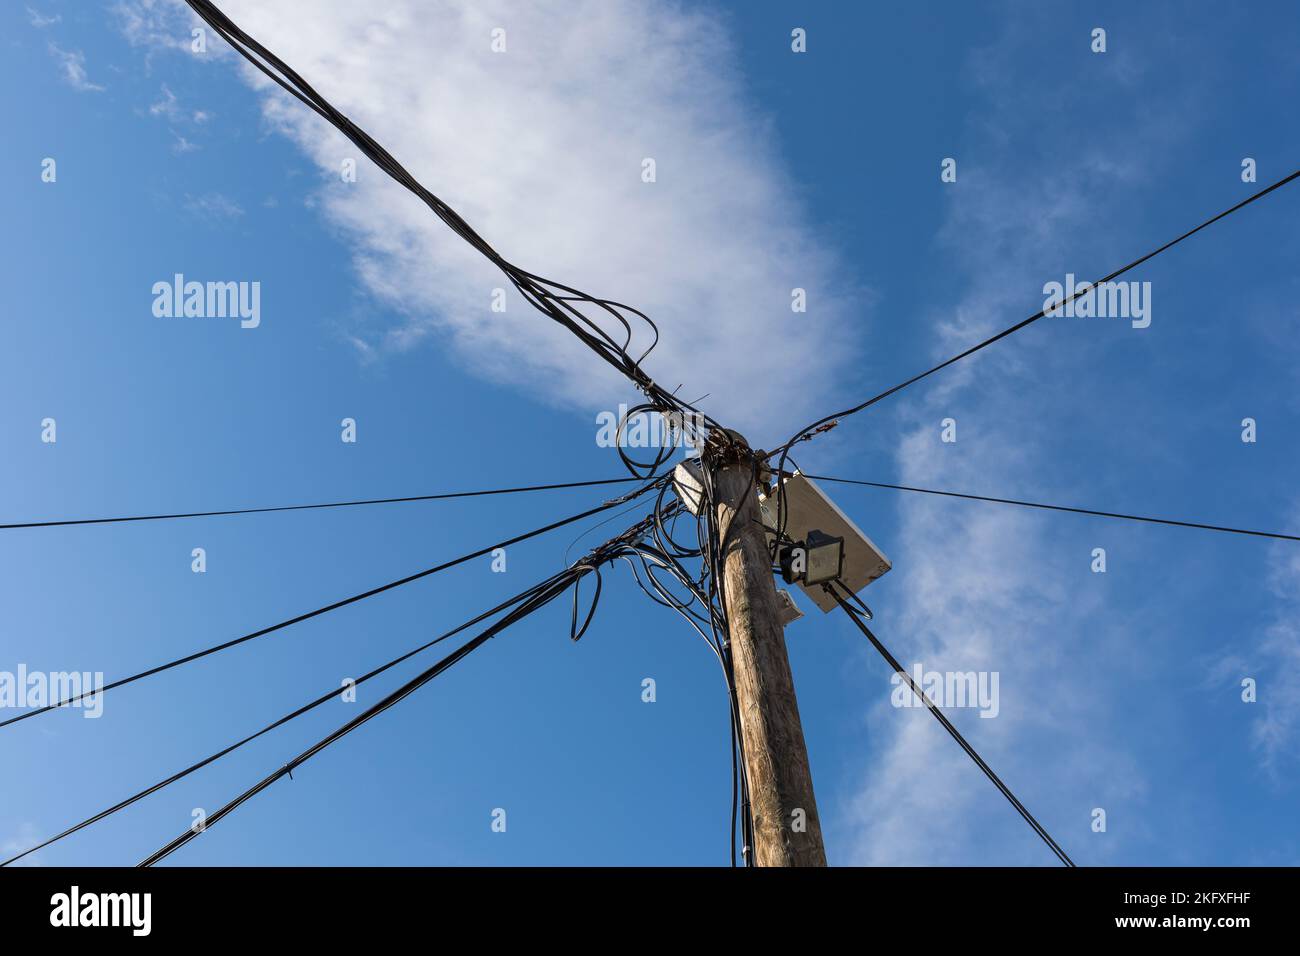 Wooden pole with electric cables Stock Photo